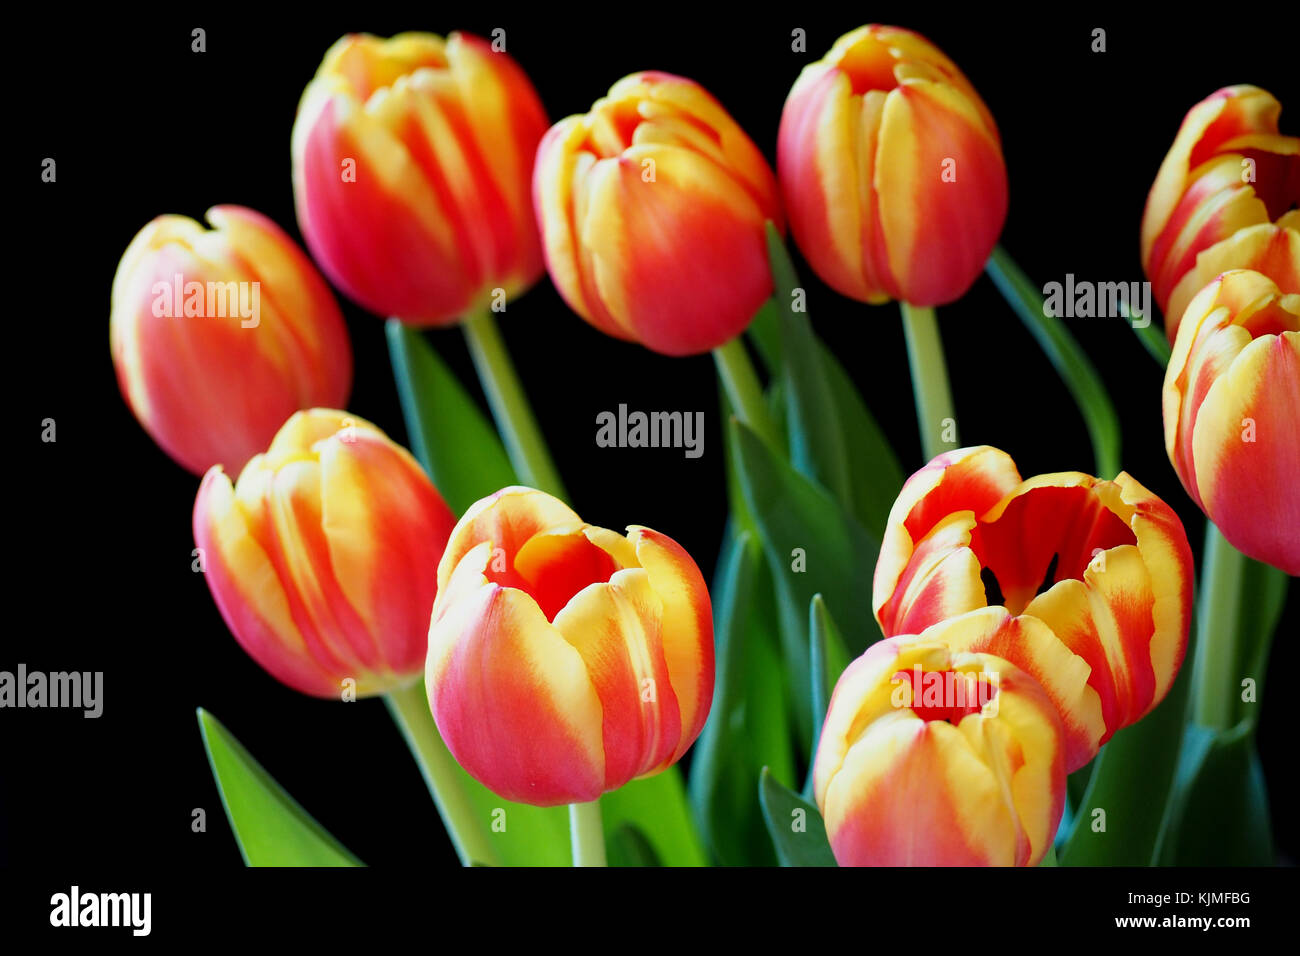 A bouquet of red and yellow tulips on a black background Stock Photo